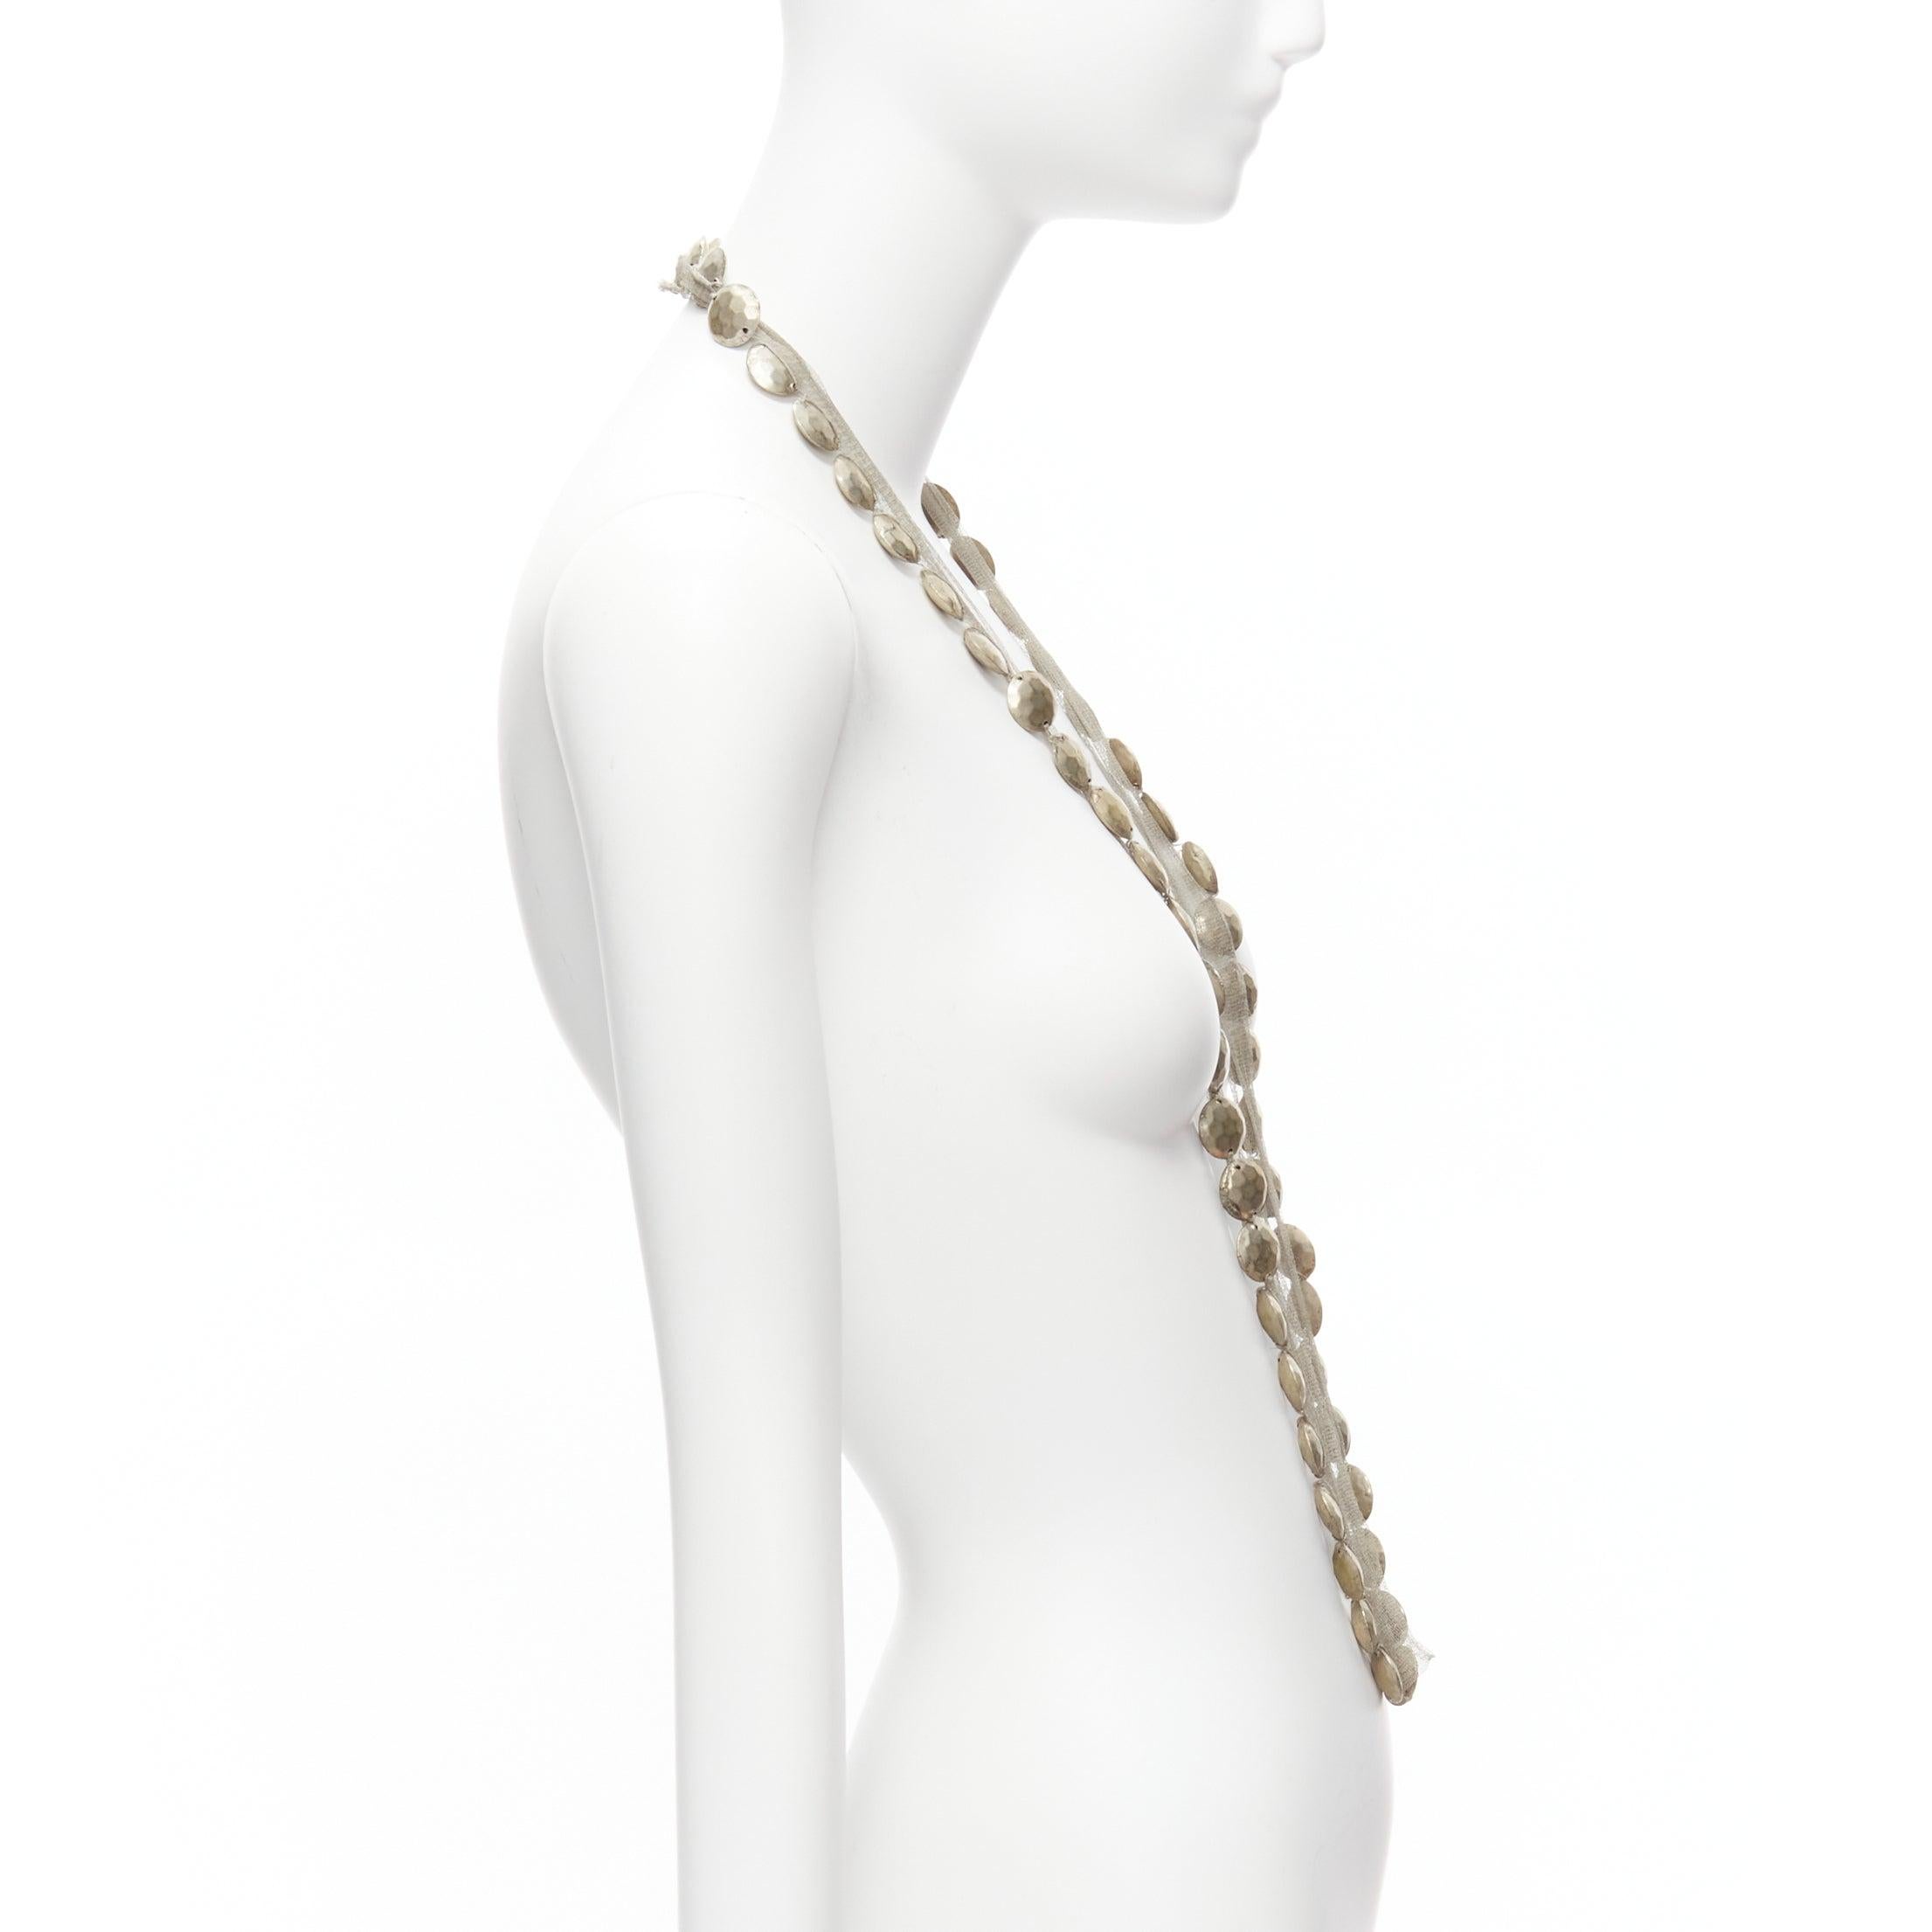 LANVIN ALBER ELBAZ gold hammered coins mesh ribbon embellished long necklace In Good Condition For Sale In Hong Kong, NT